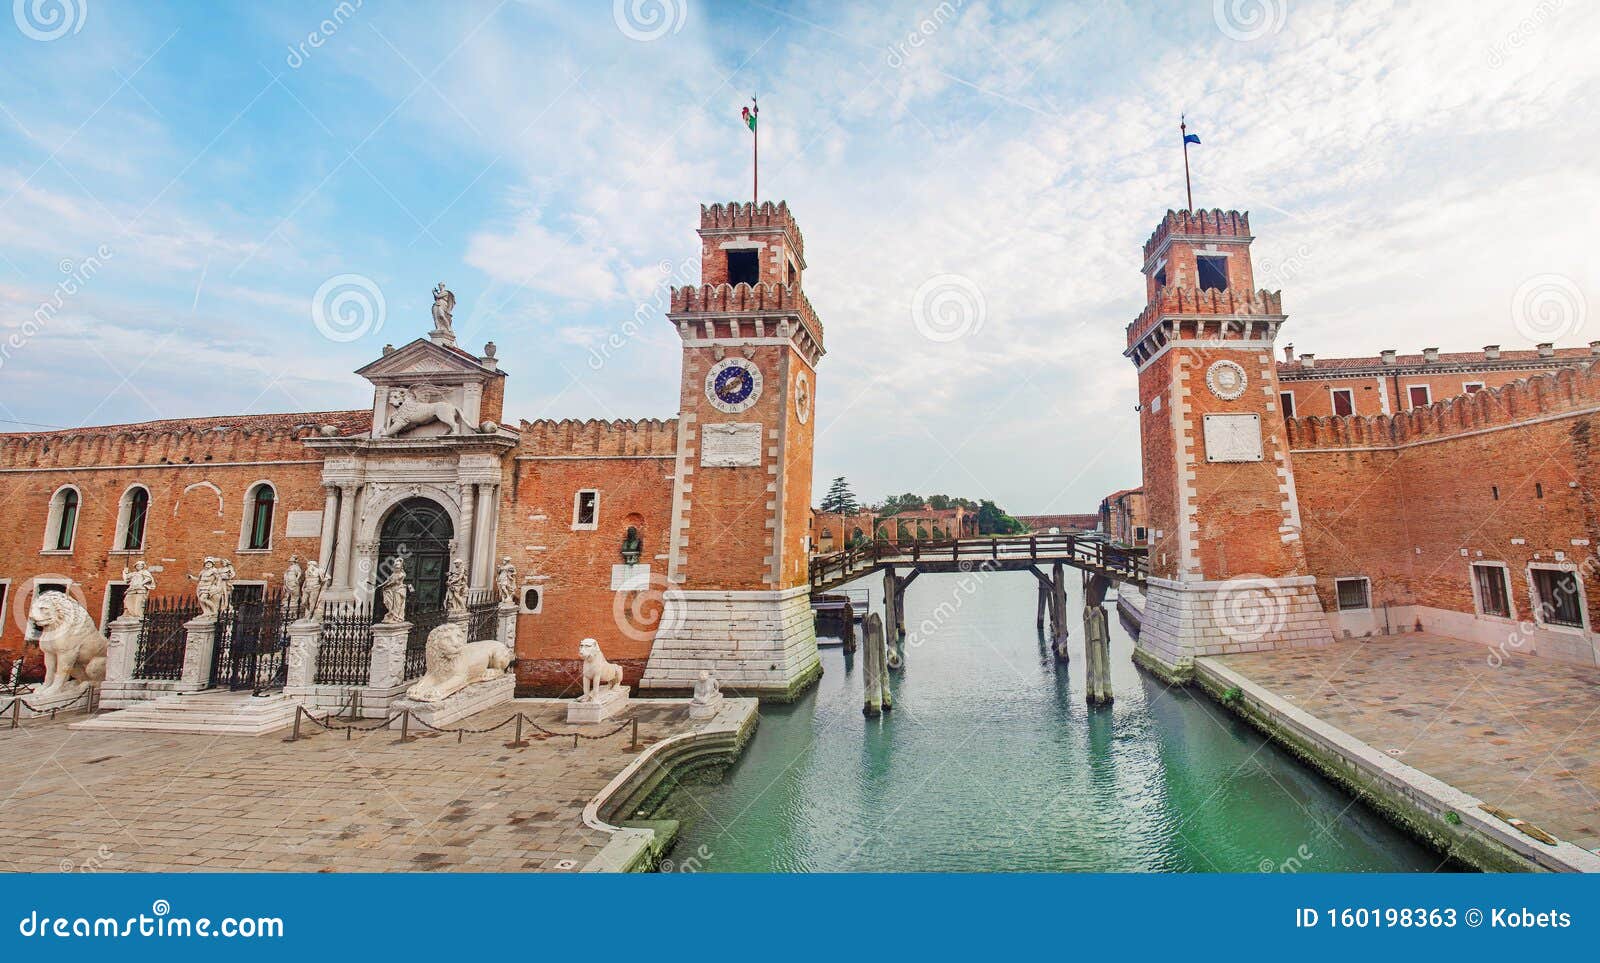 water channel and entrance gate to venetian arsenal